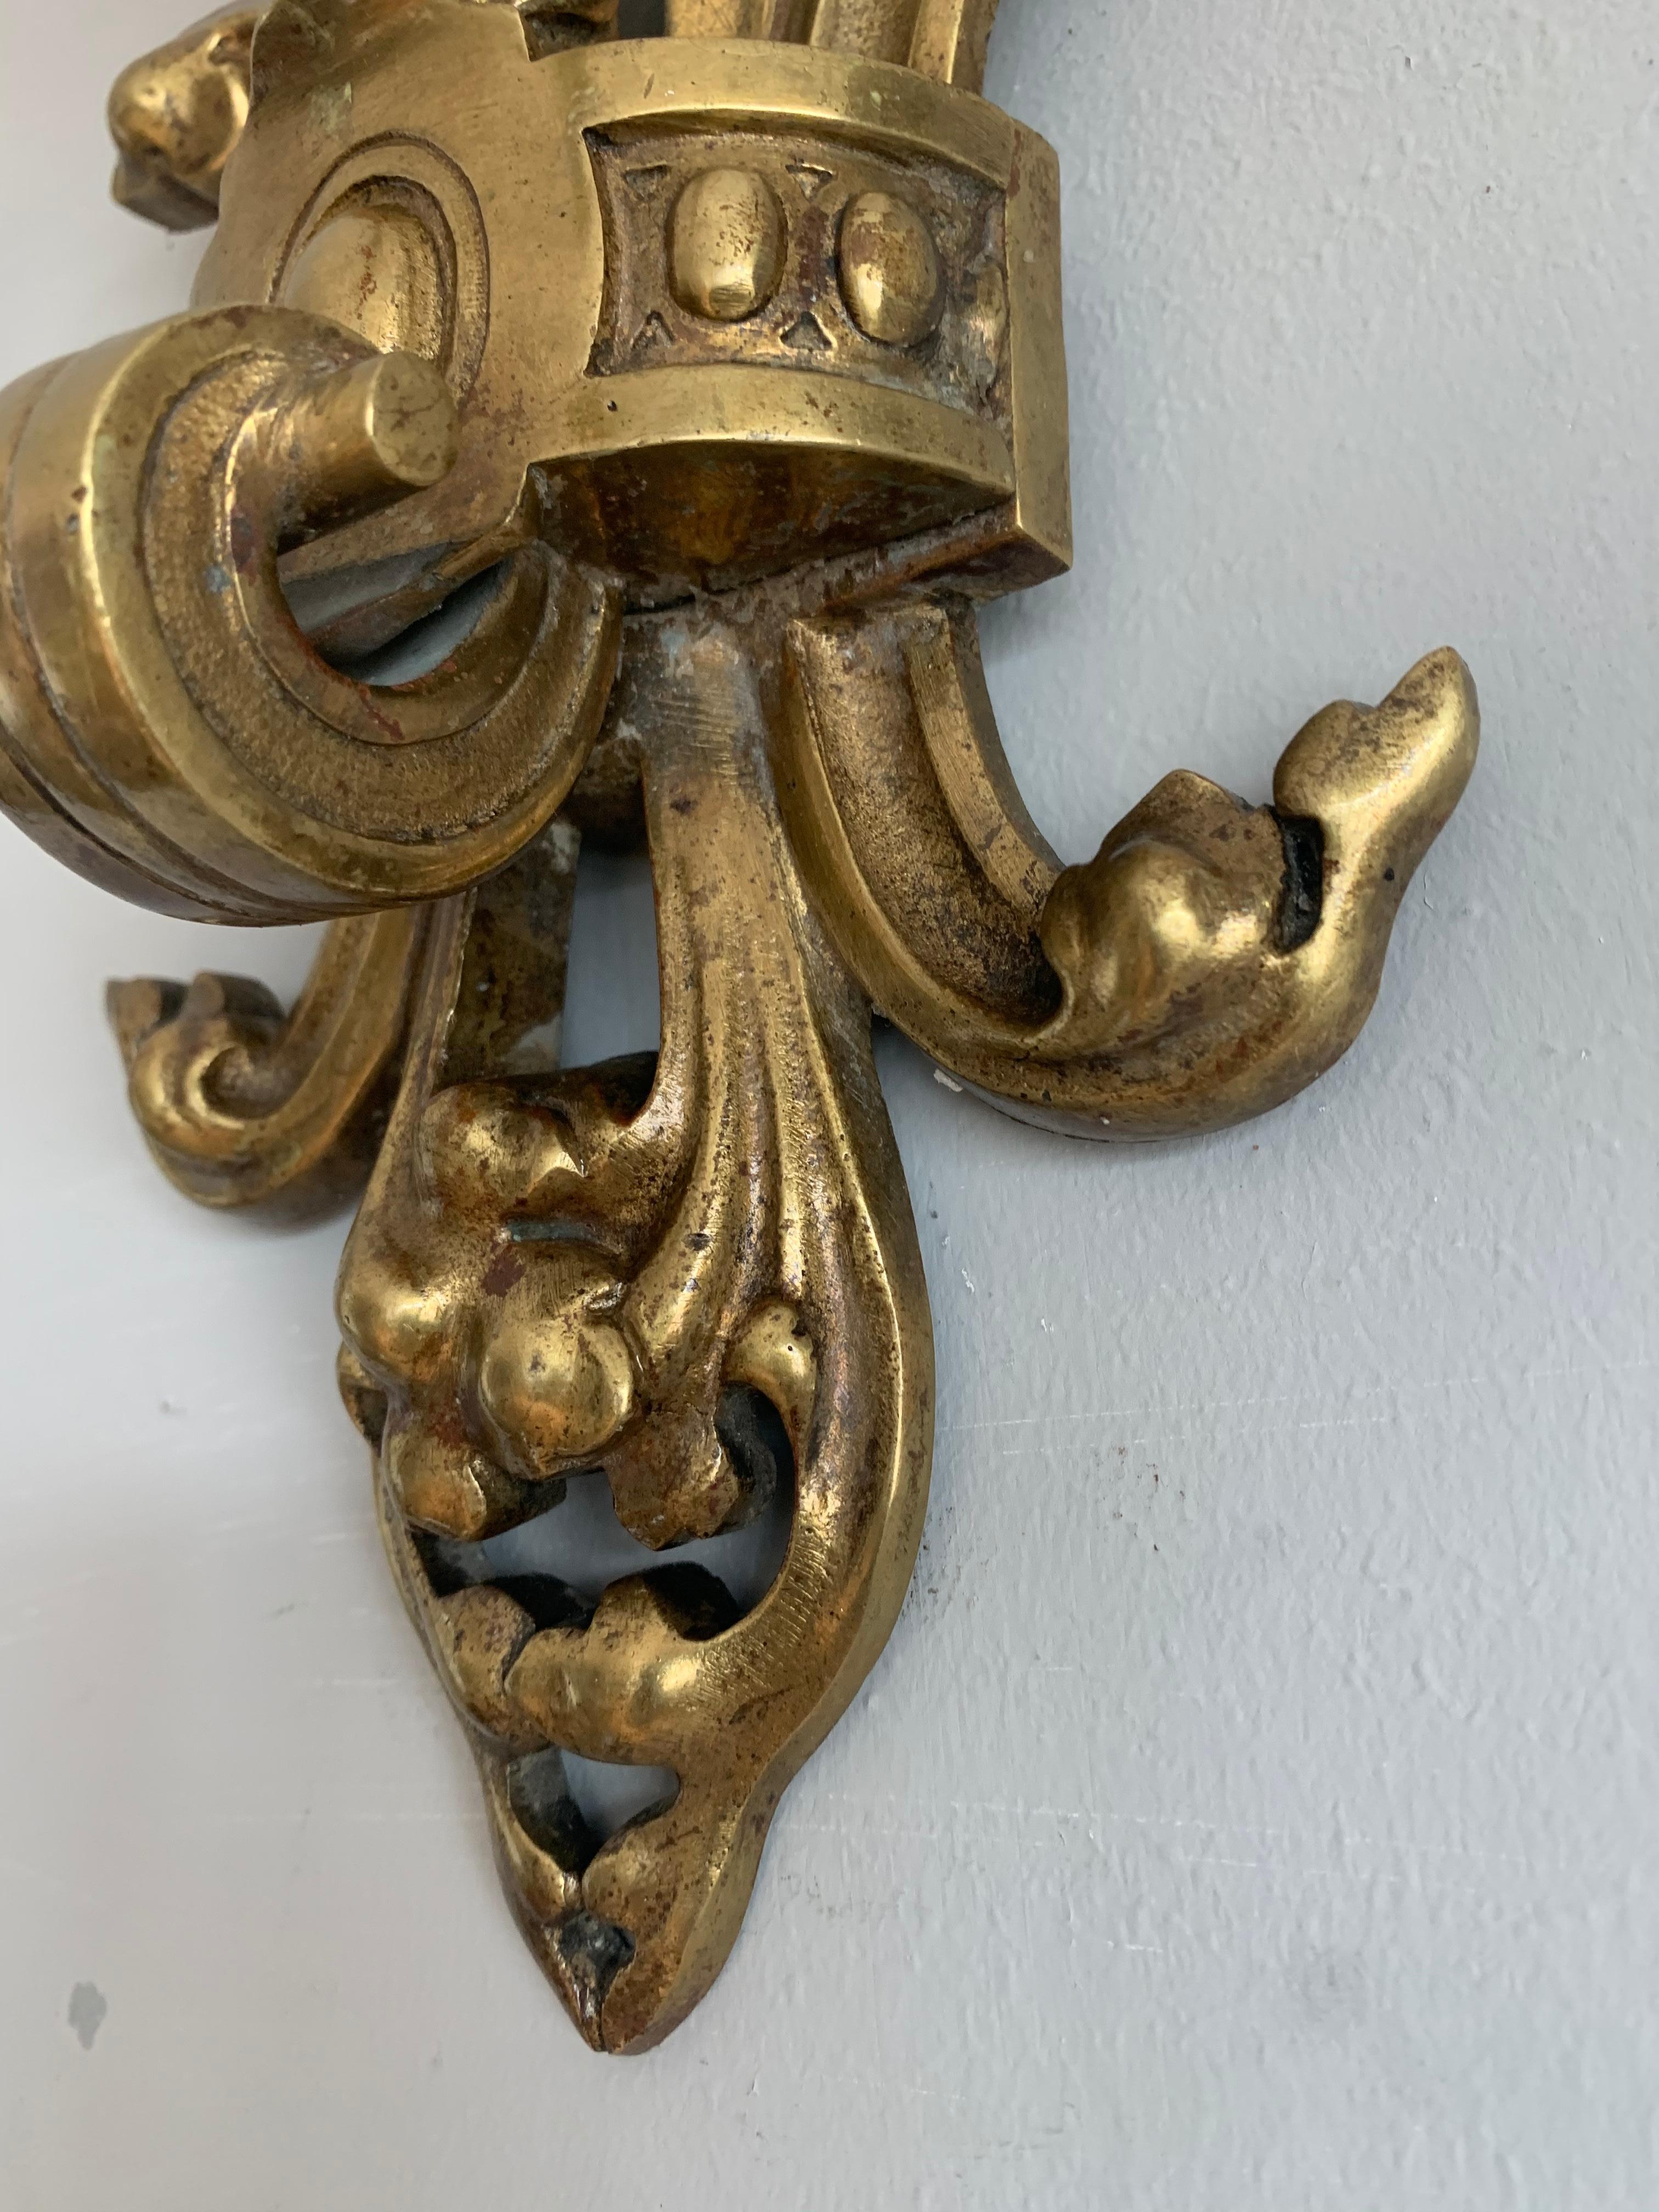 Rare Pair of Antique Gothic Revival Bronze Wall Sconces with Dragon Sculptures For Sale 12